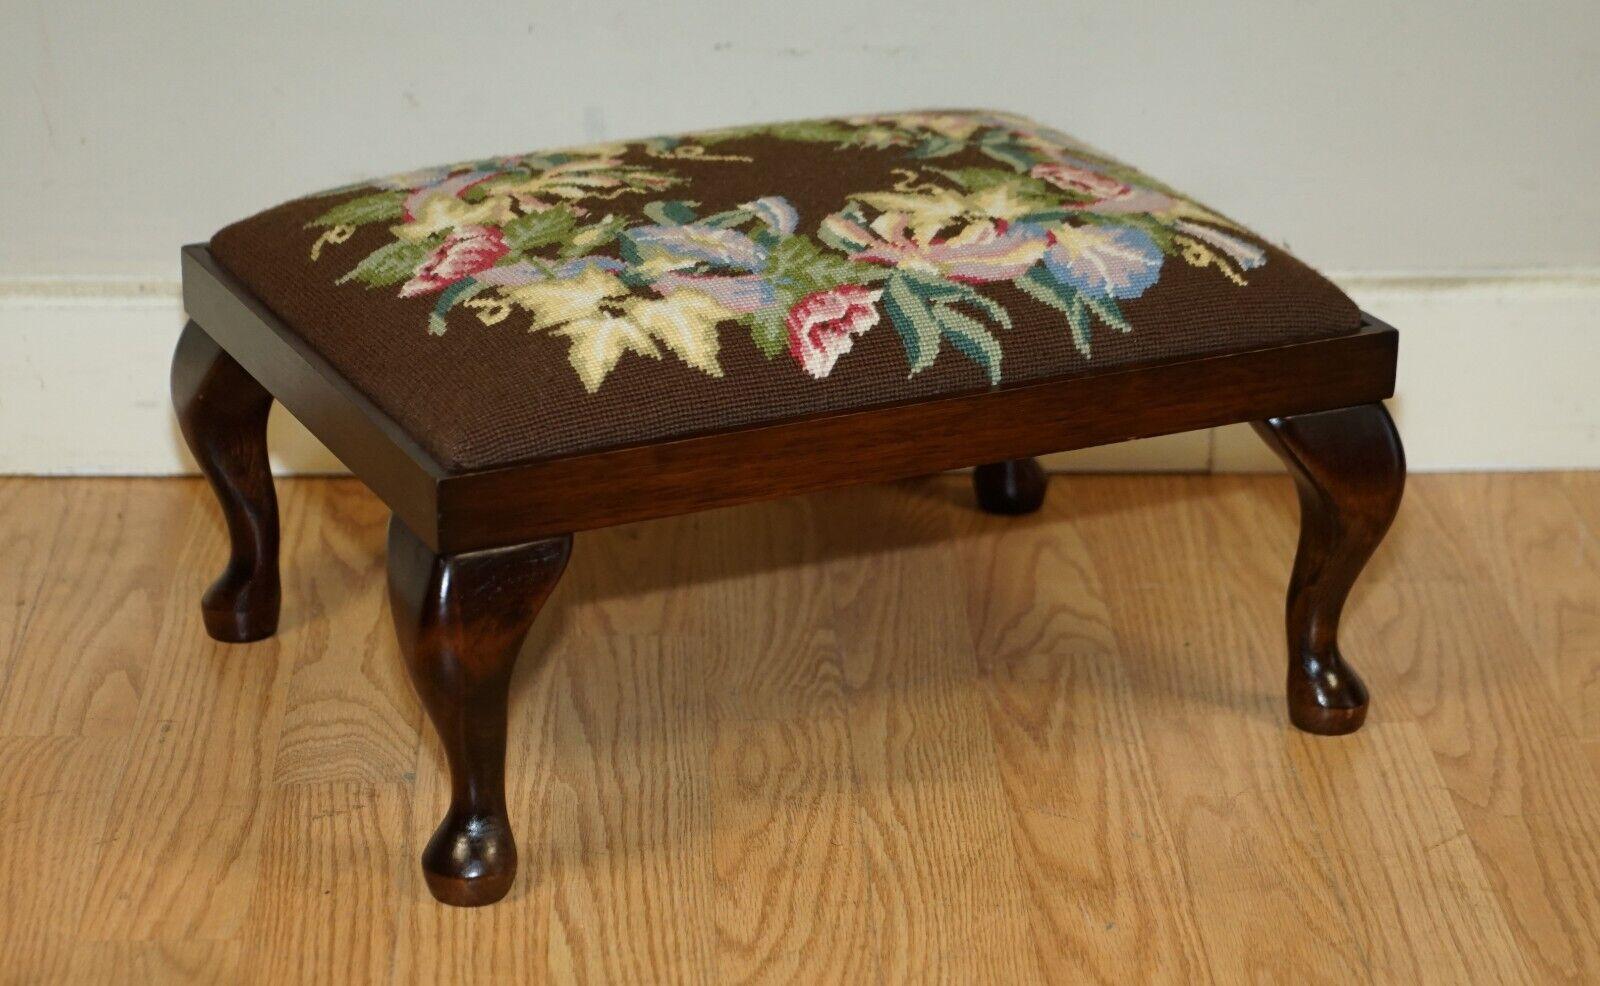 Here we have for sale this lovely mahogany and embroidered floral vintage footstool stool. This footstool is the perfect size for sliding under a wingback armchair. As you can see from the pictures it is in fantastic condition, it has been waxed and